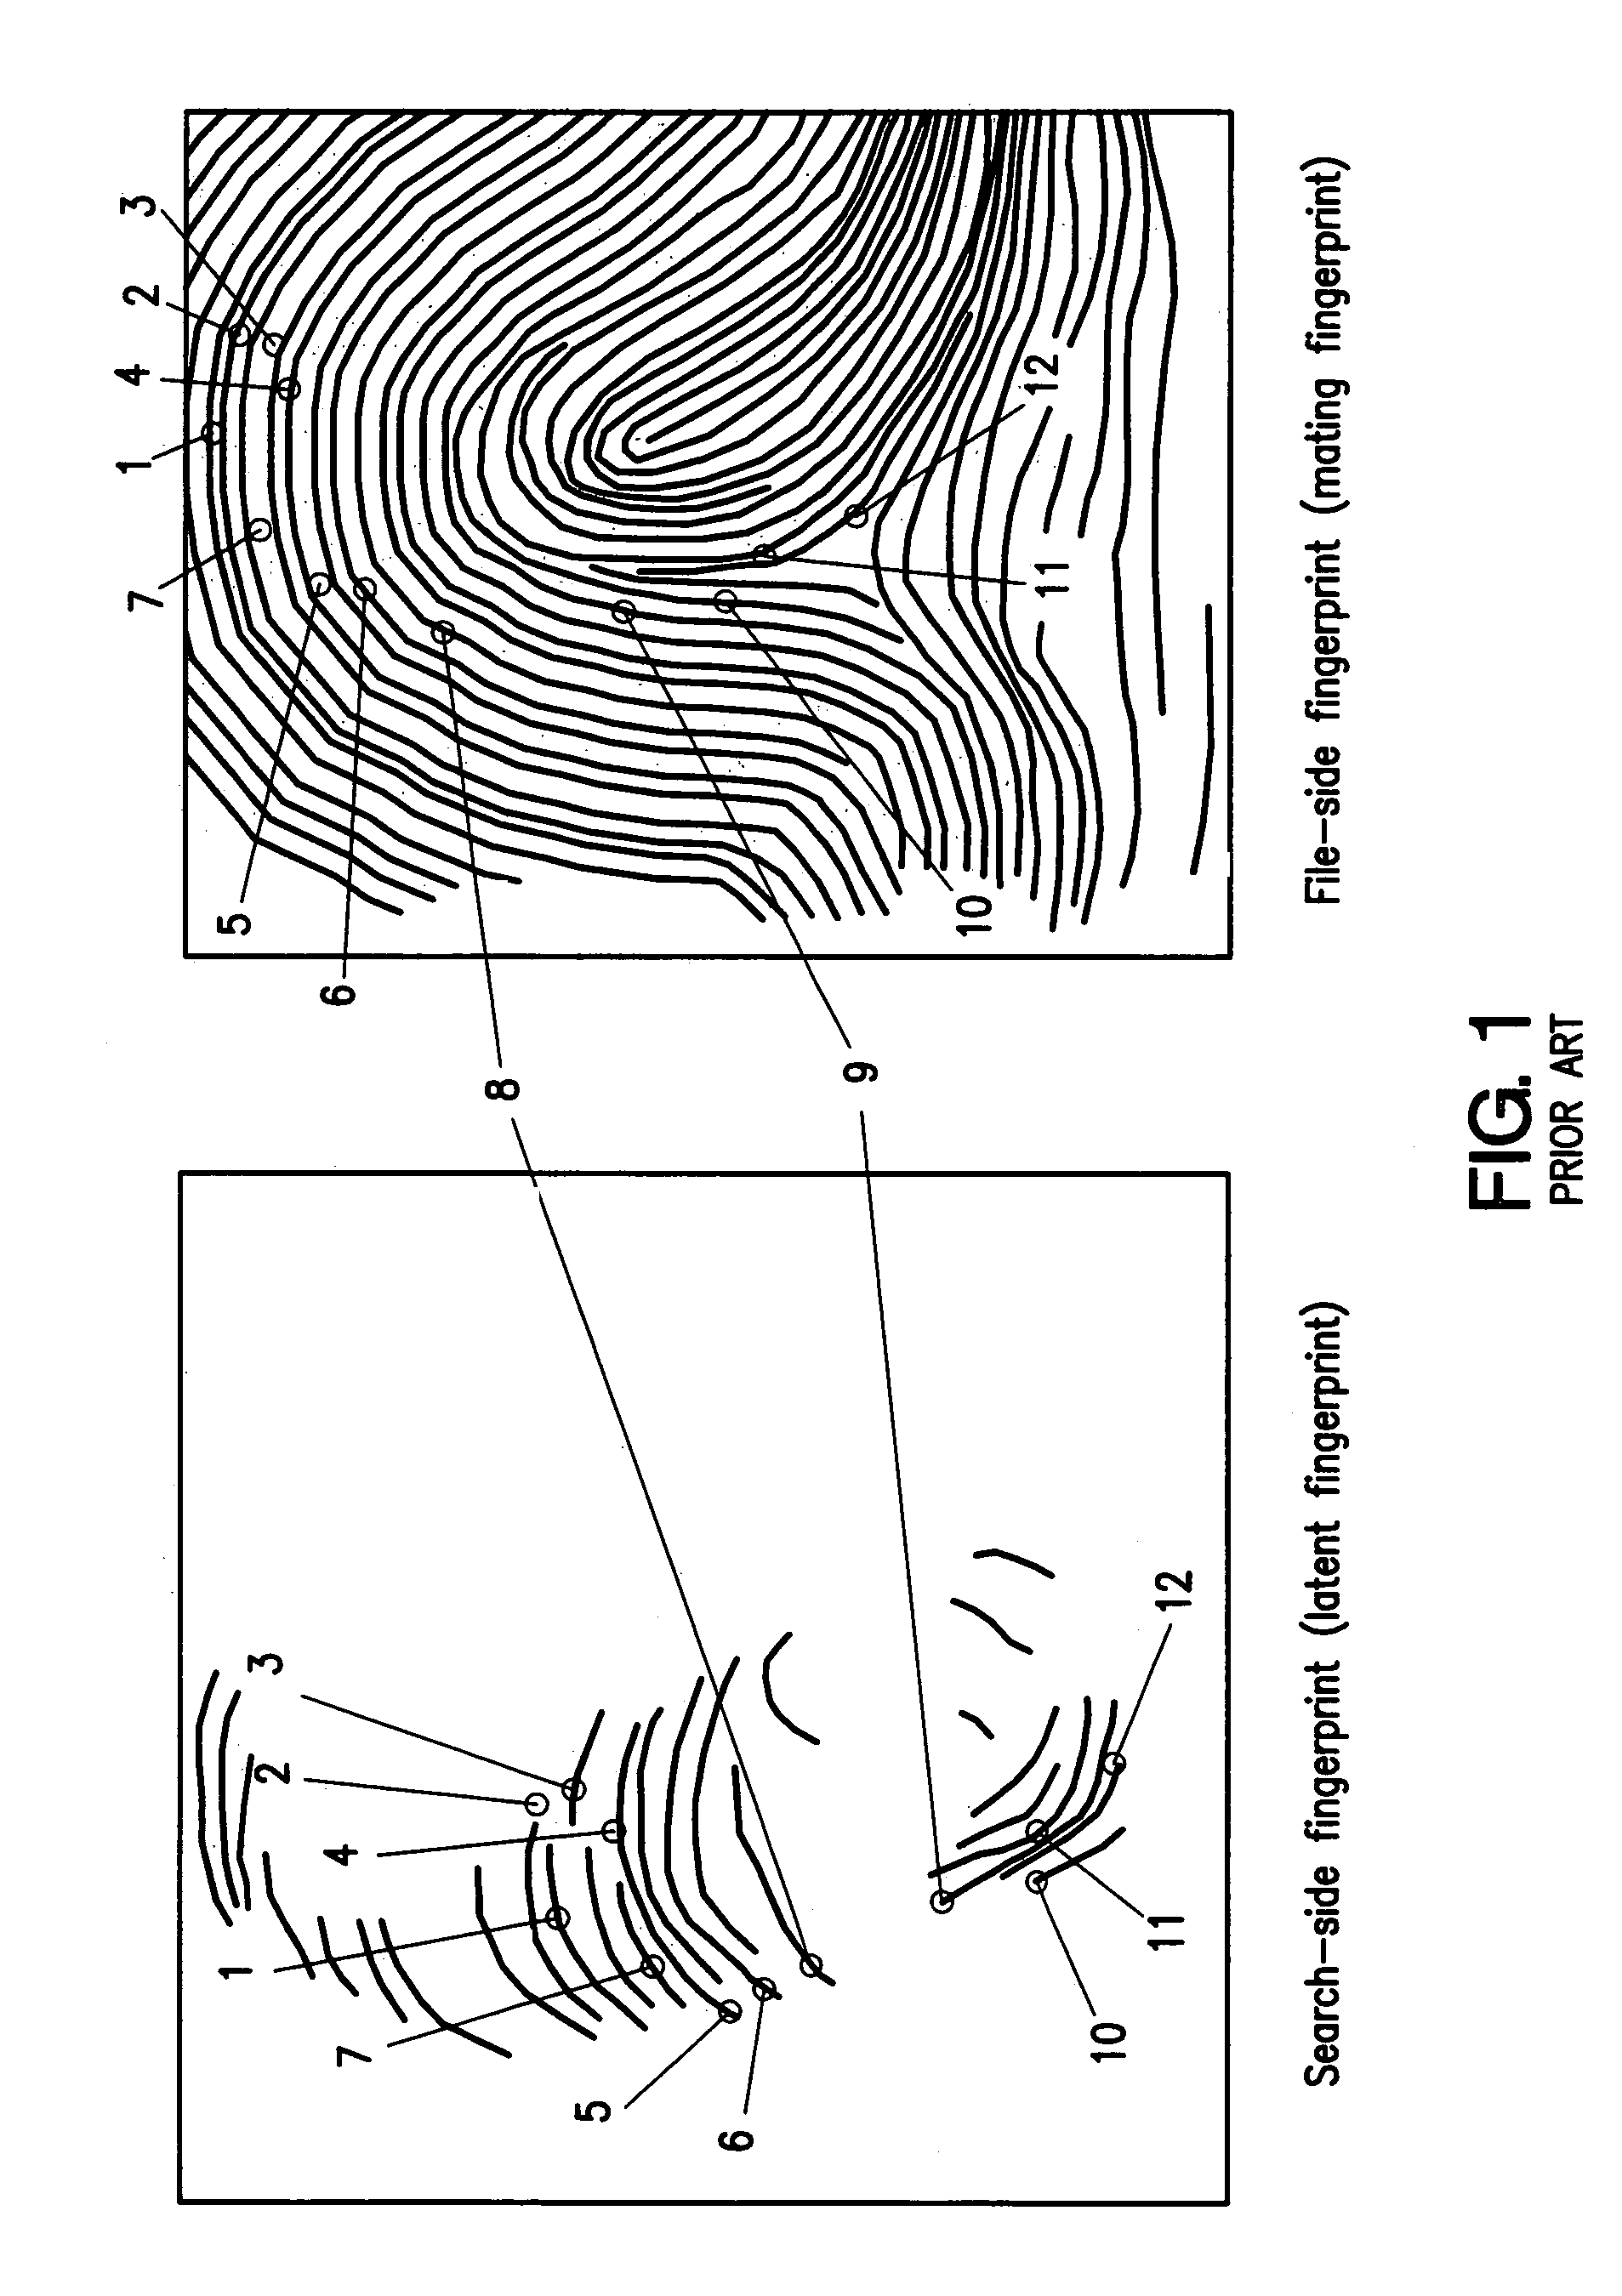 Method and apparatus for analyzing streaked pattern image